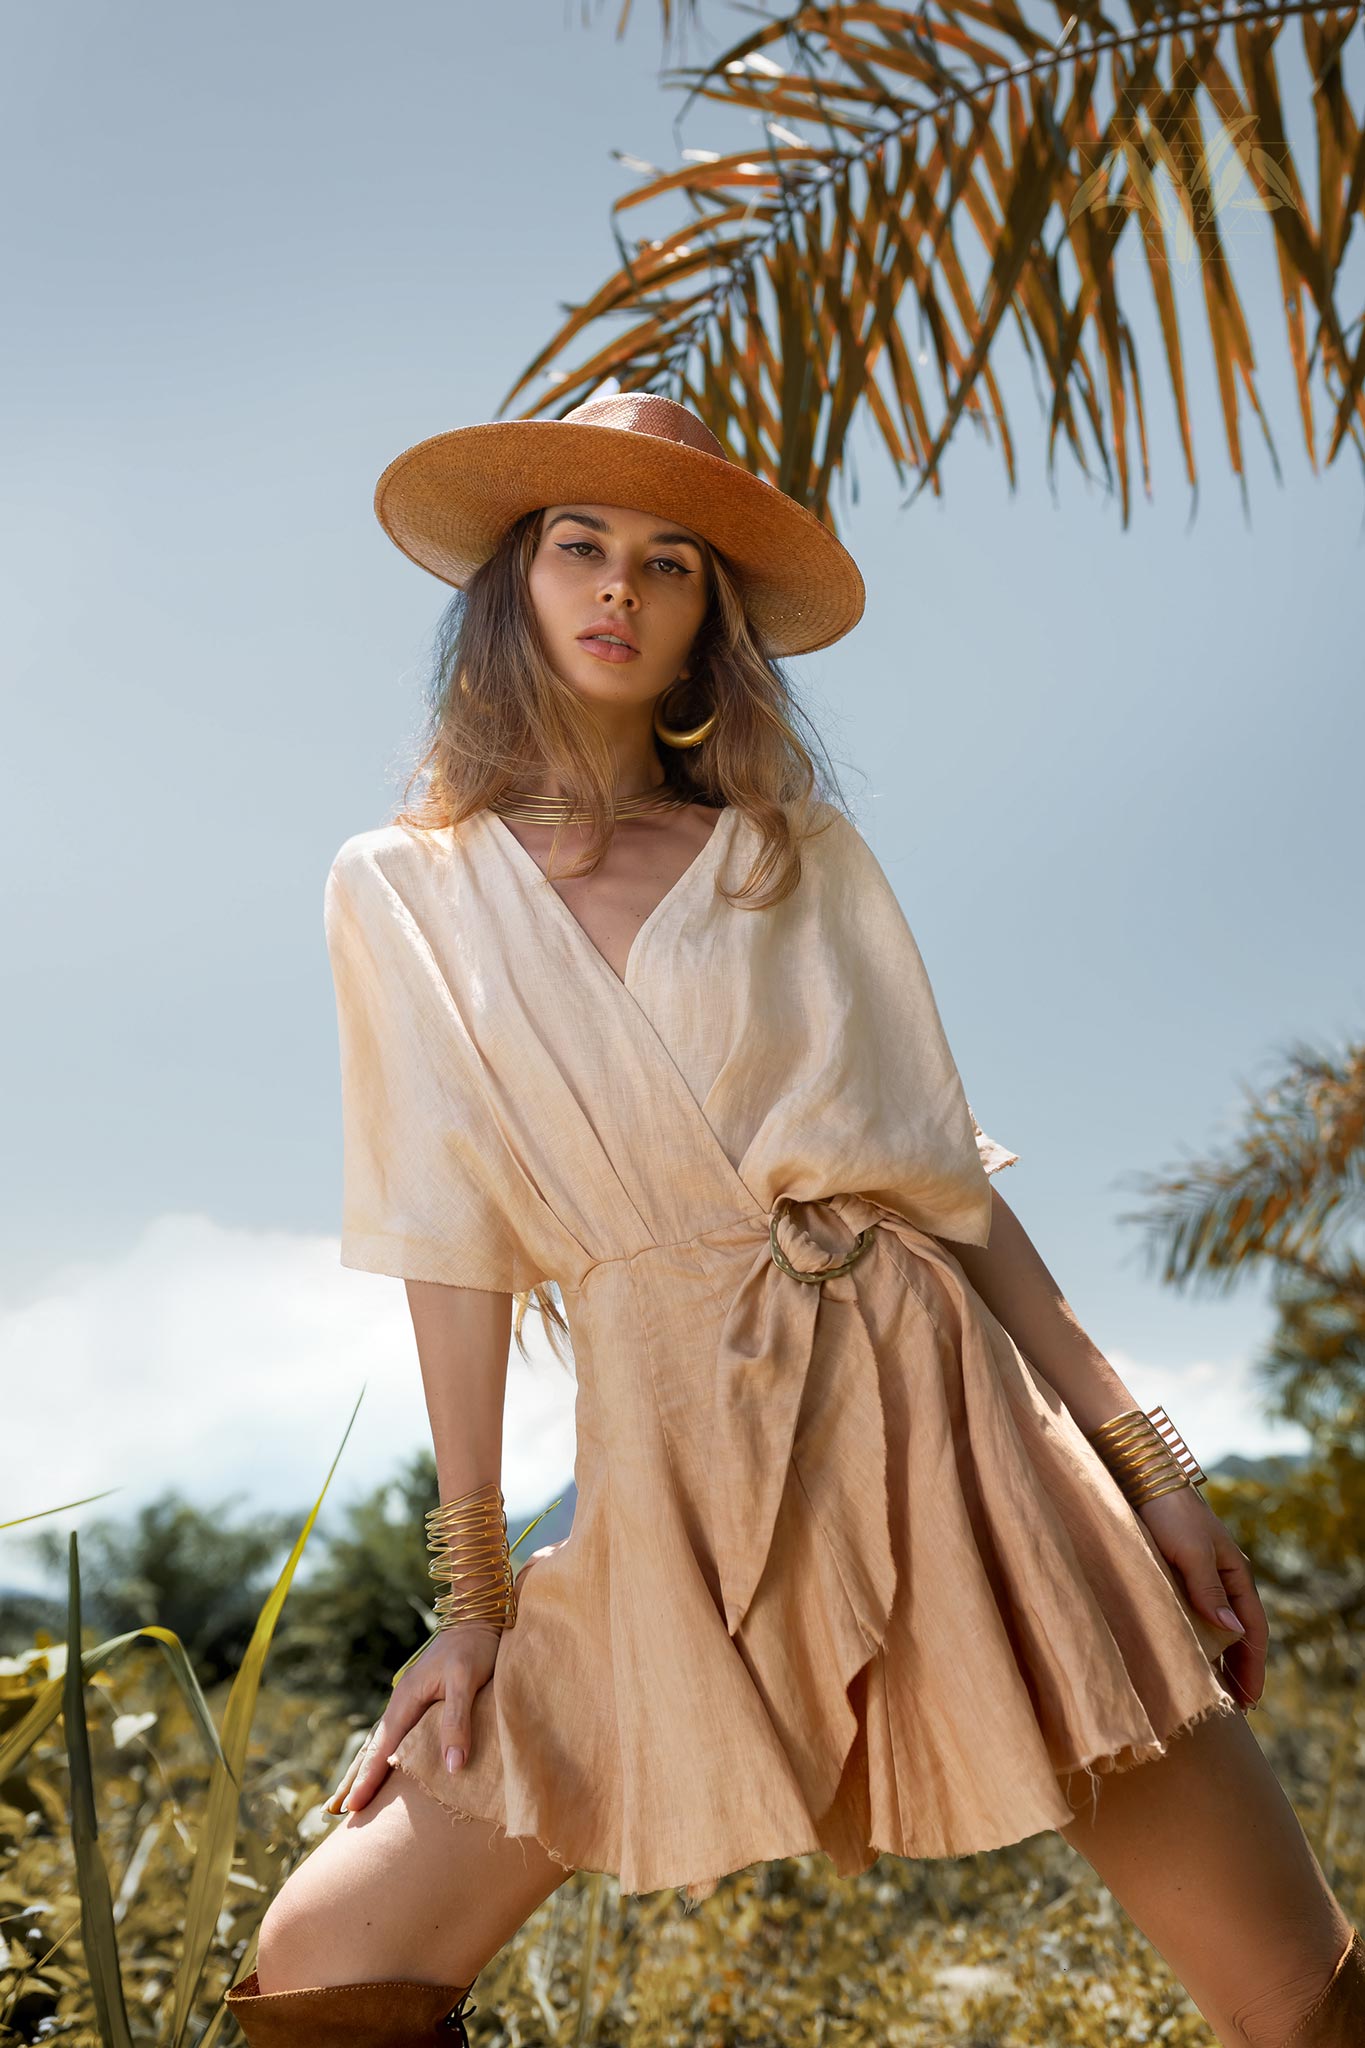 Ombre V Neck Mini Dress: Step into summer with our ombre boat neck mini dress. Crafted from sustainably dyed organic linen, this versatile piece features a boat neckline and a stunning ombre effect from light pink to beige pink.